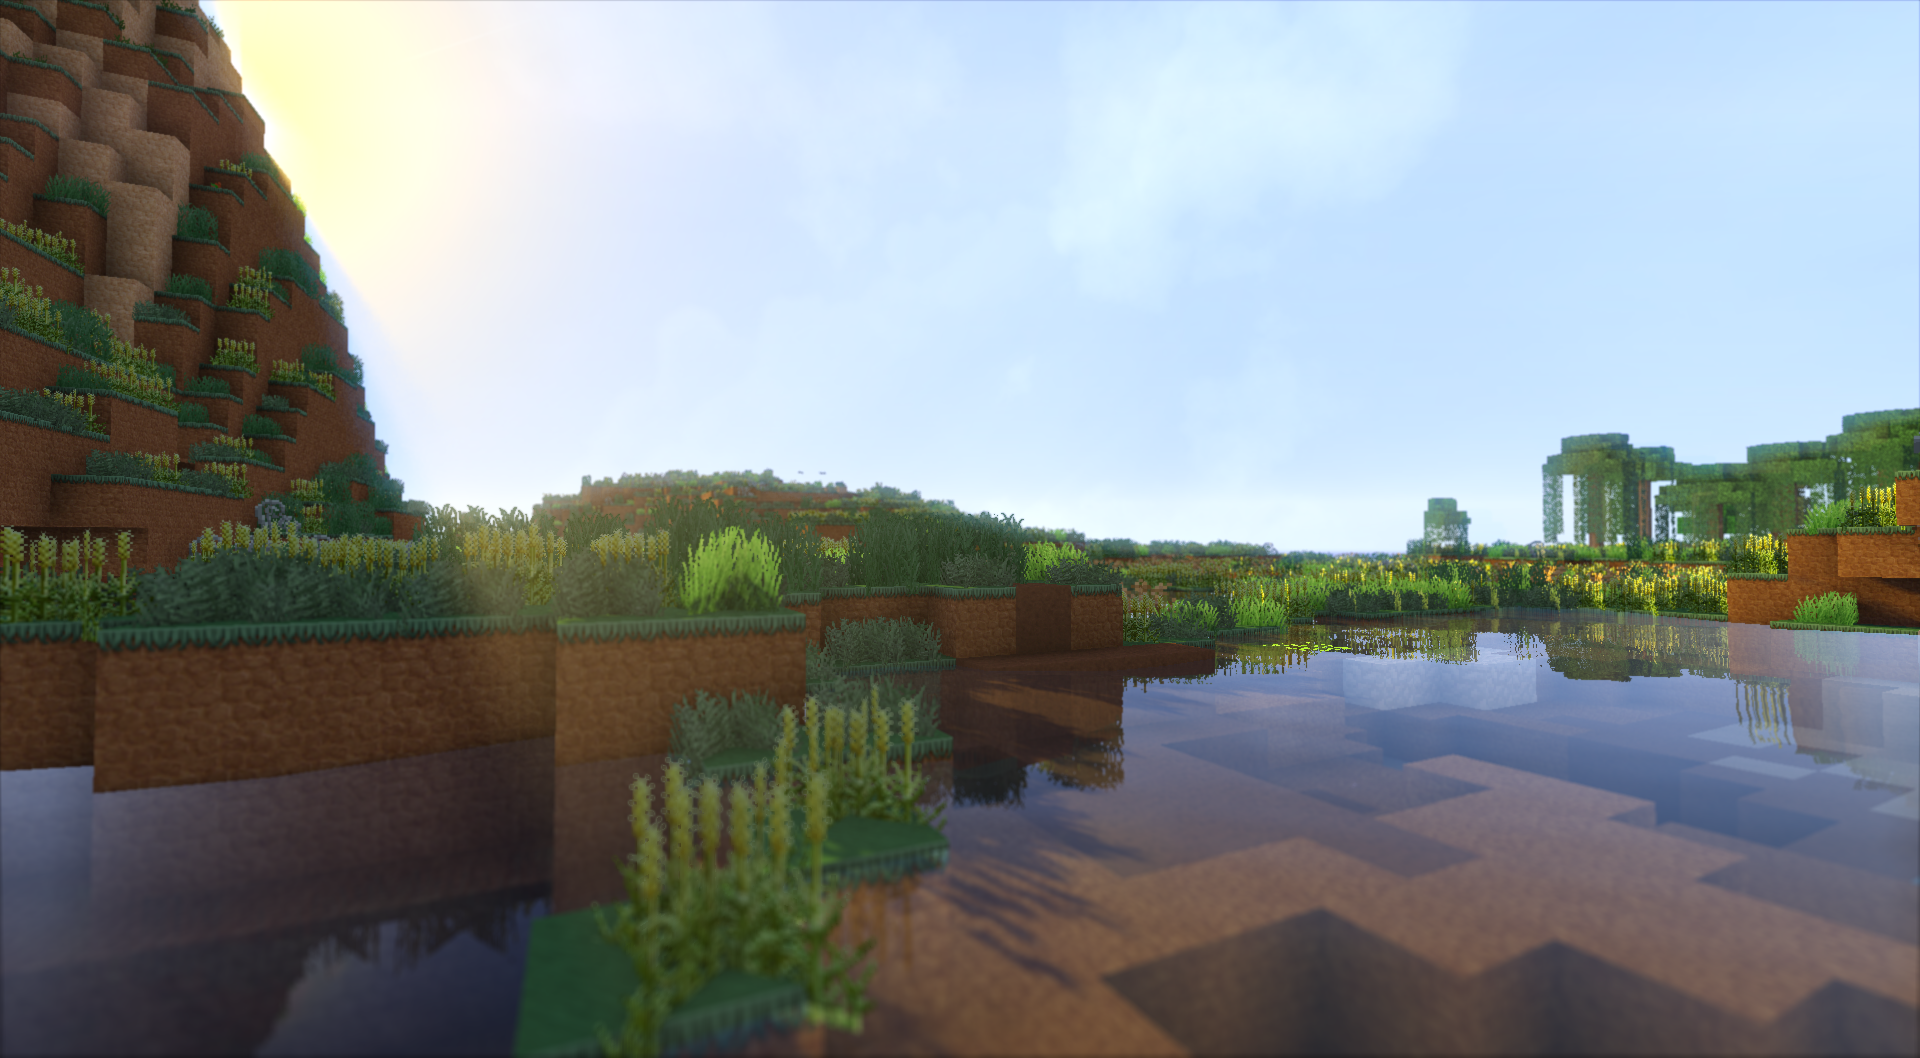 1 6 4 Shader Mod Working Properly Download Link Or Get Your Minecraft Beautified Feed The Beast